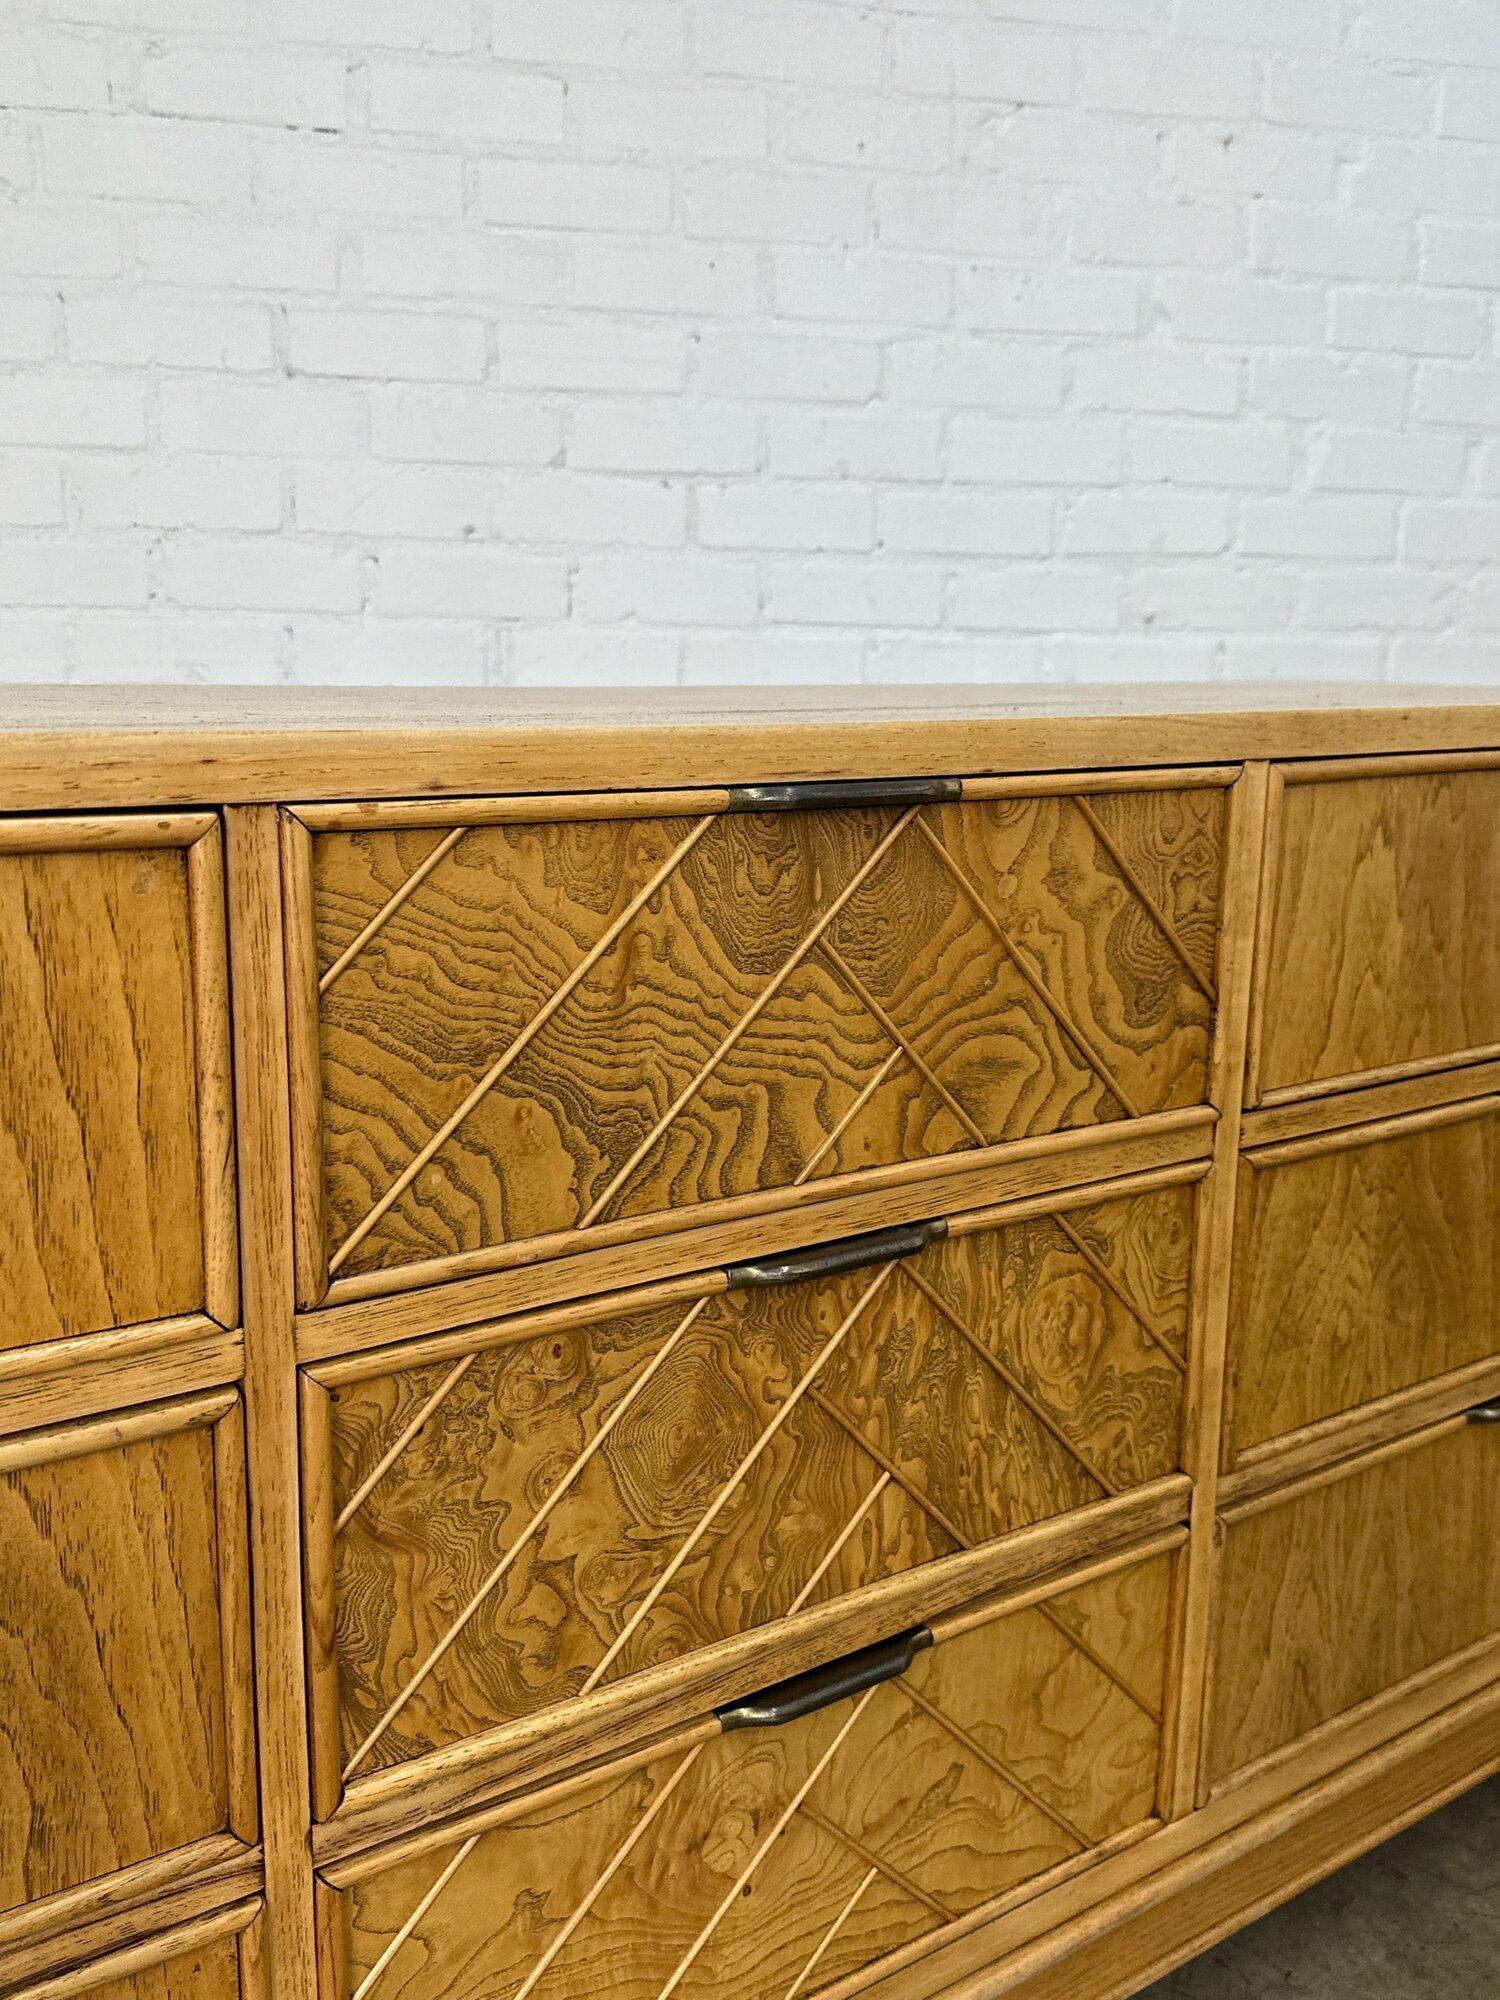 W70 D19 H31.5

1970’s Fully refinished nine drawer dresser by American of Martinsville. Made from oak and Burl wood. Item is structurally sound and sturdy. 